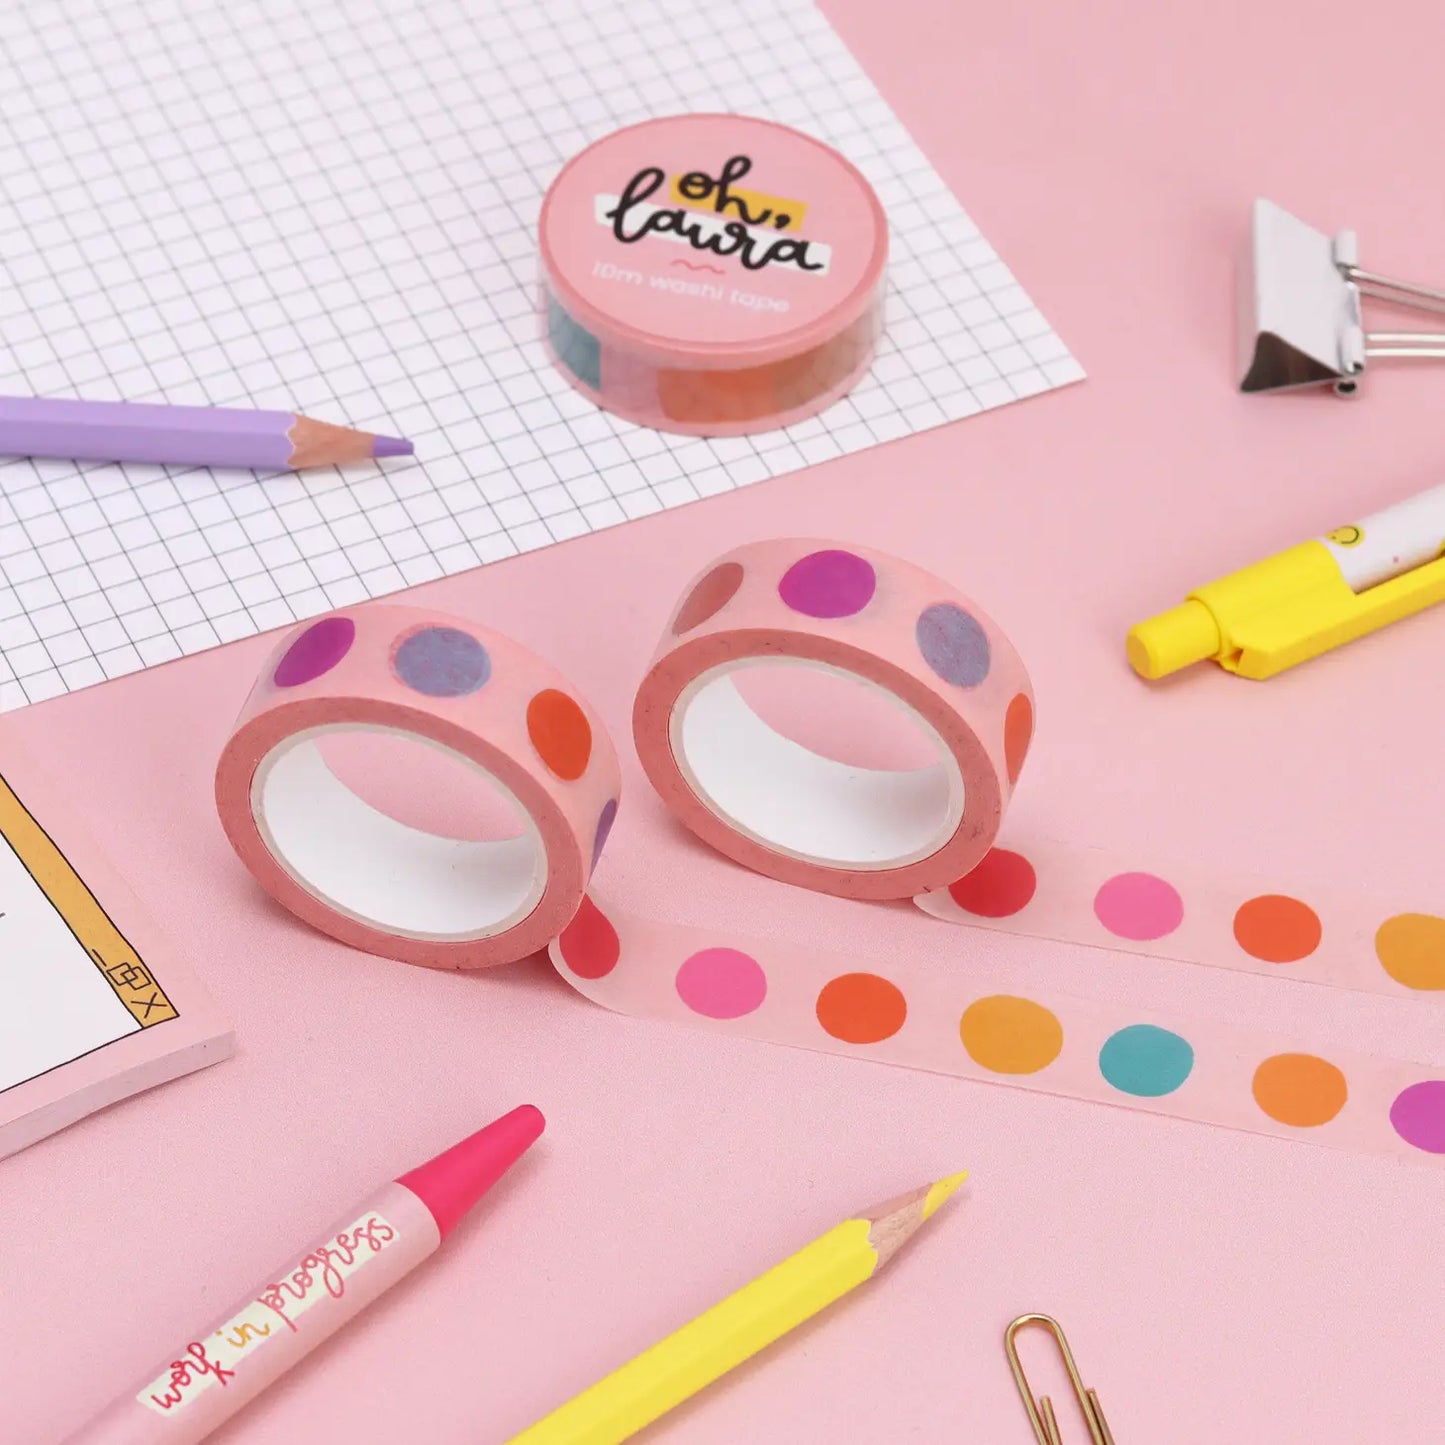 colourful dots washi tape, surrounded by other stationery items.